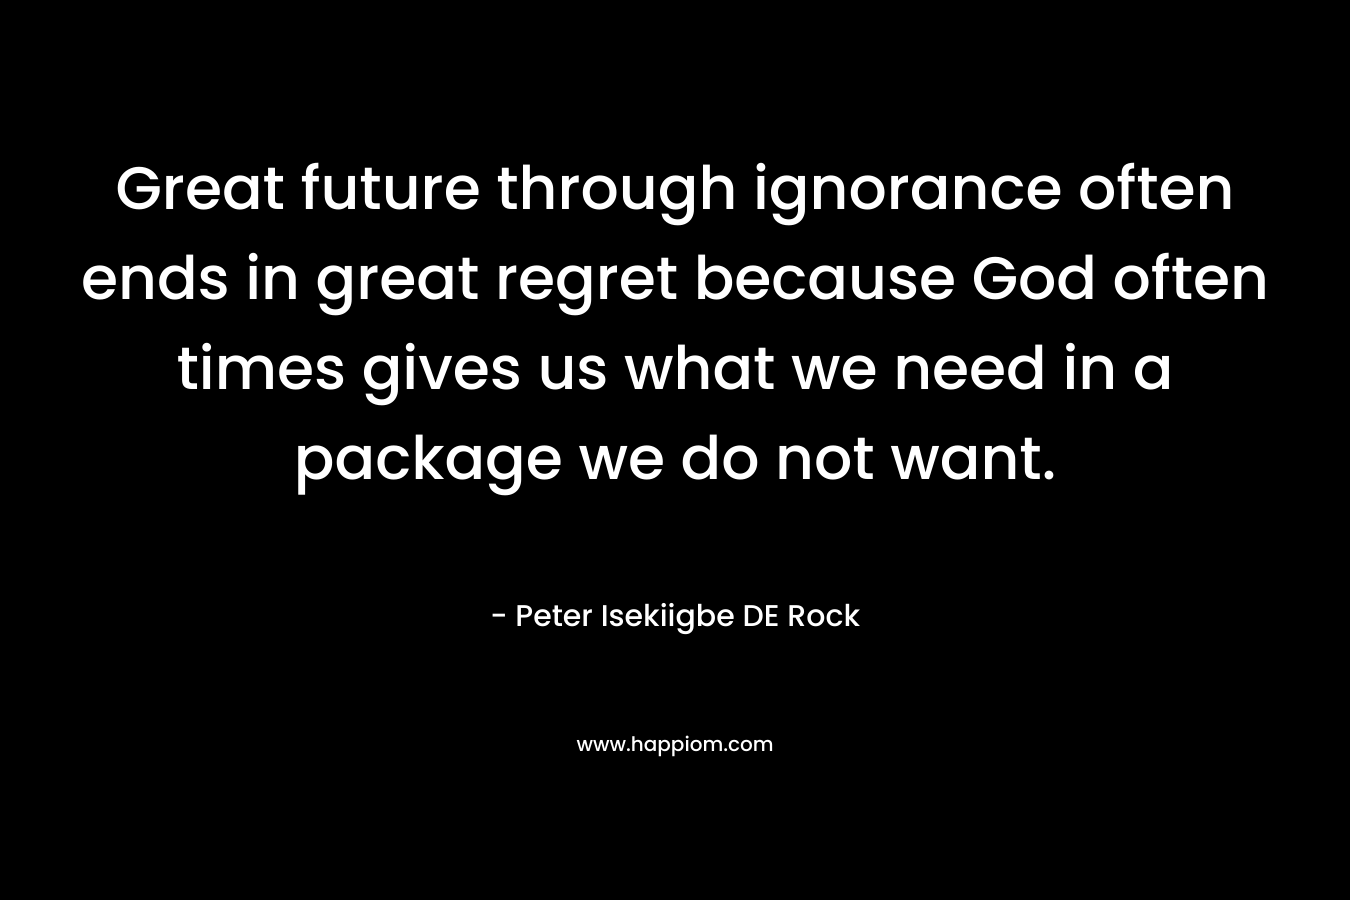 Great future through ignorance often ends in great regret because God often times gives us what we need in a package we do not want. – Peter Isekiigbe DE Rock